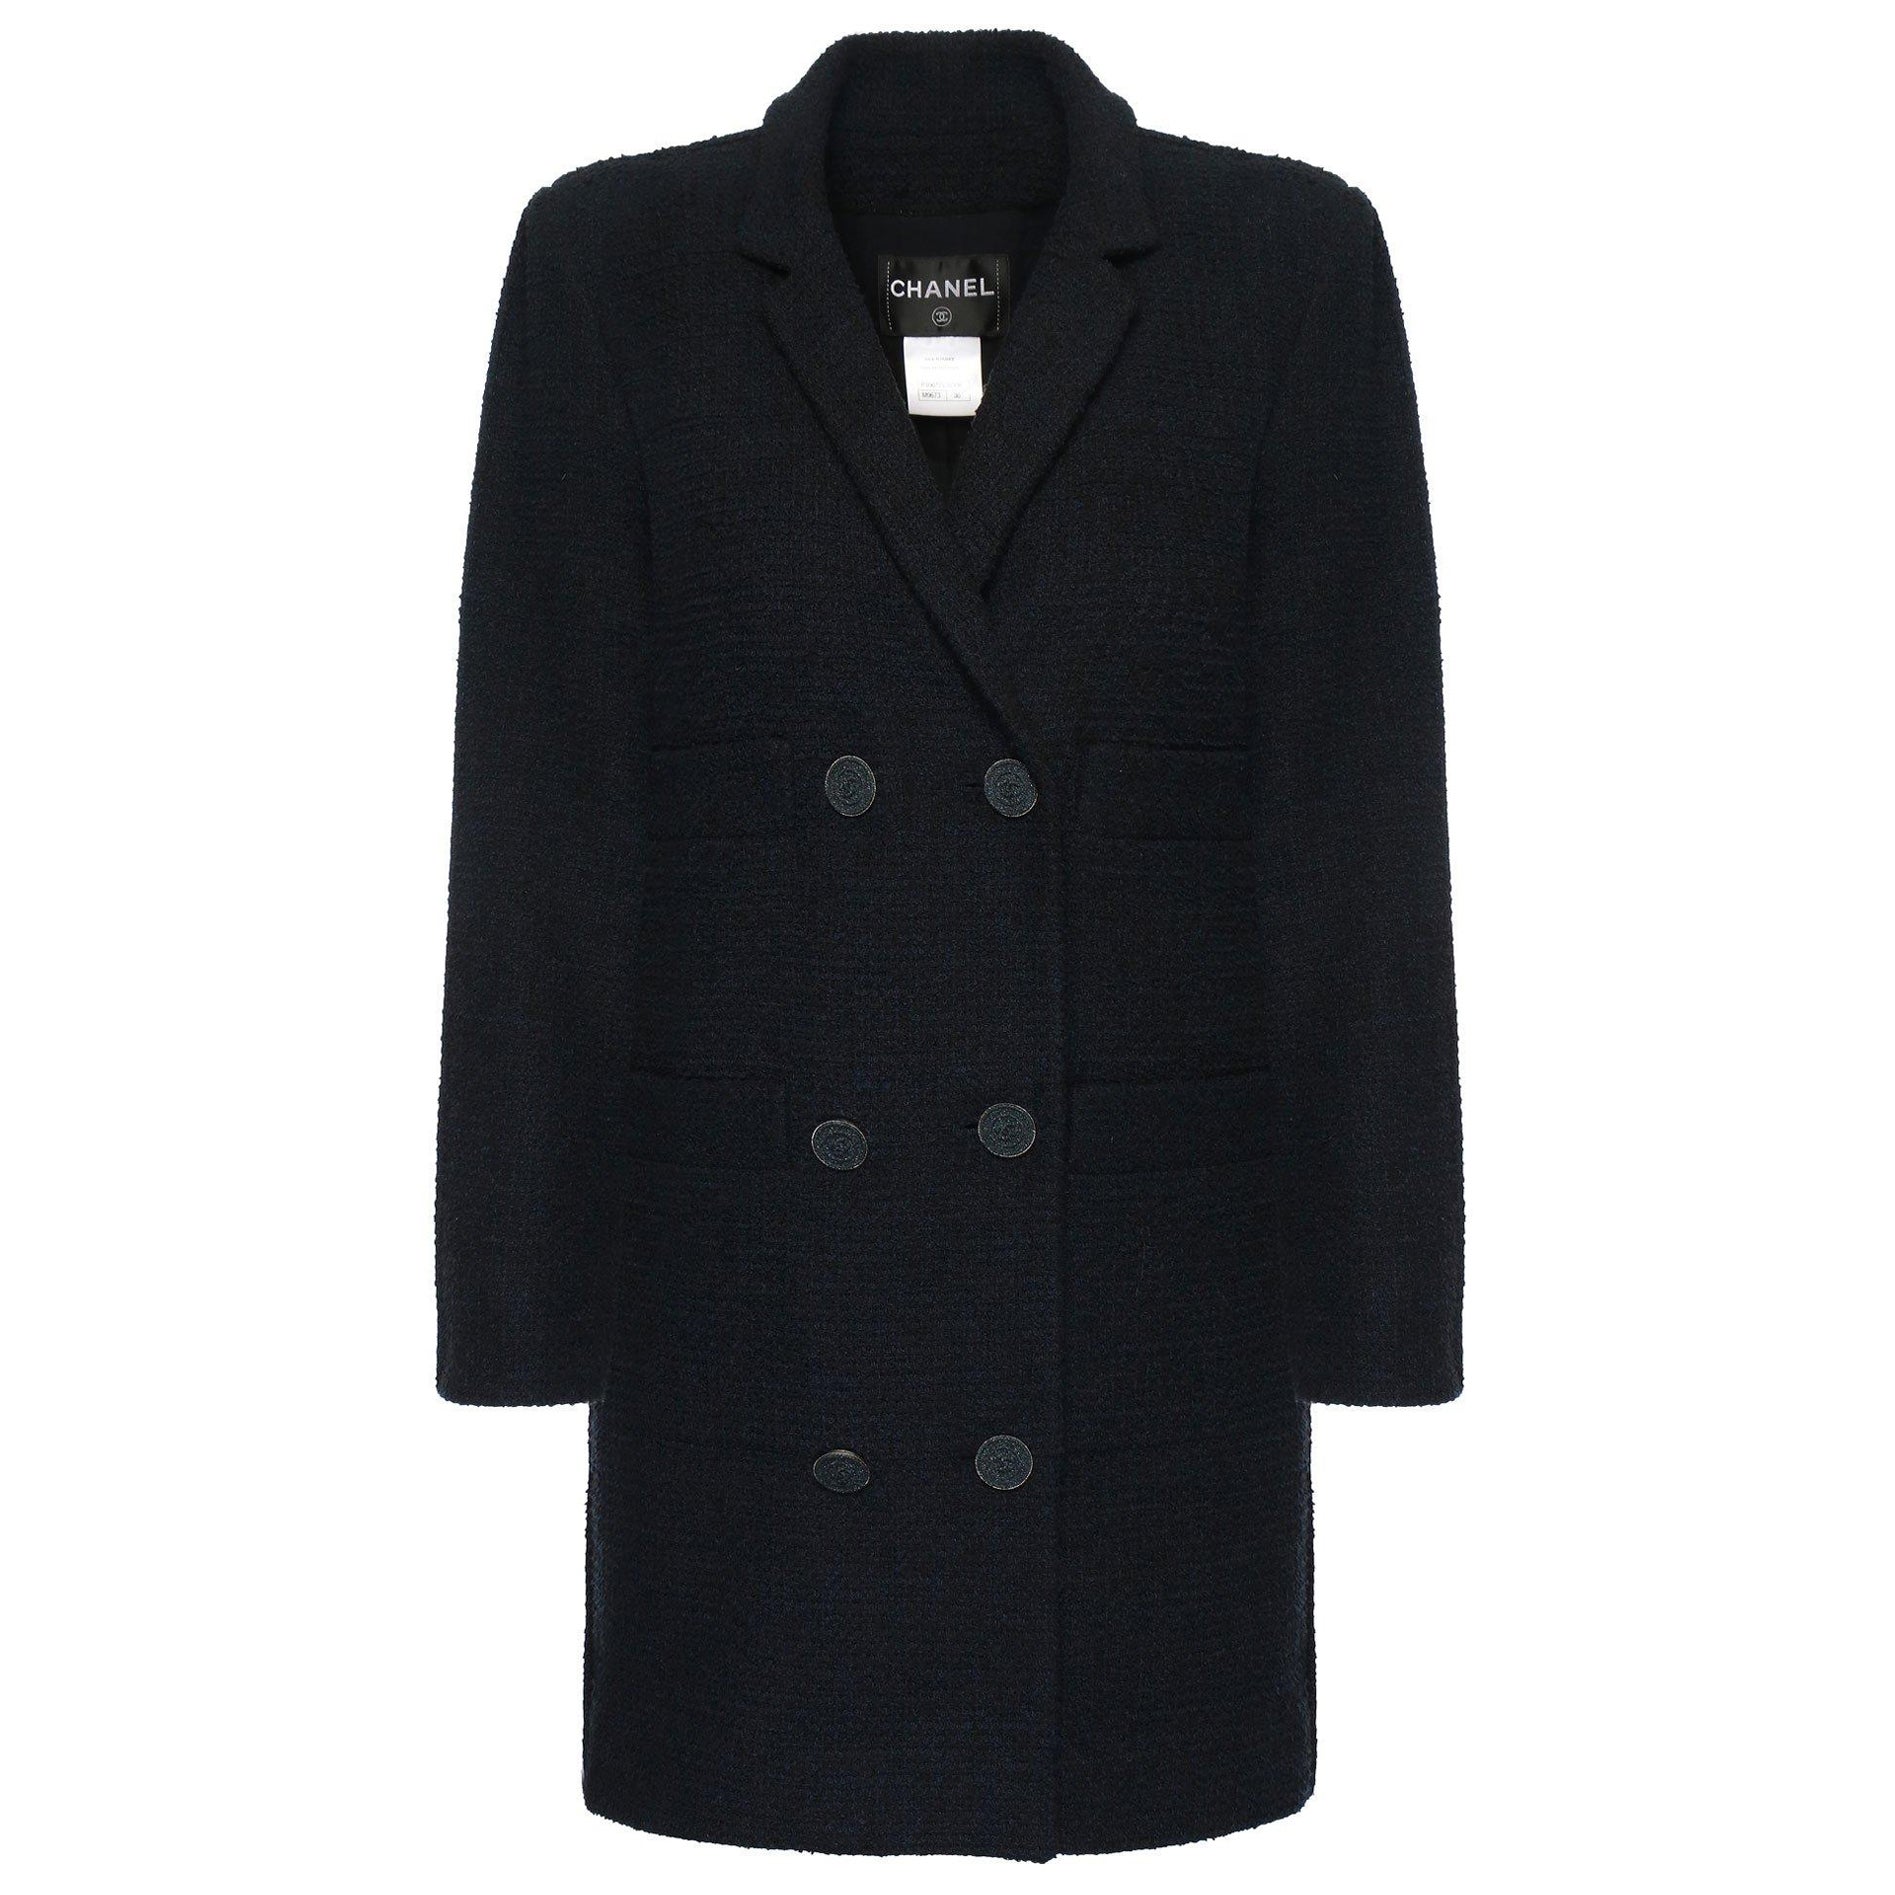 Chanel CC Buttons Oversized Black Tweed Jacket